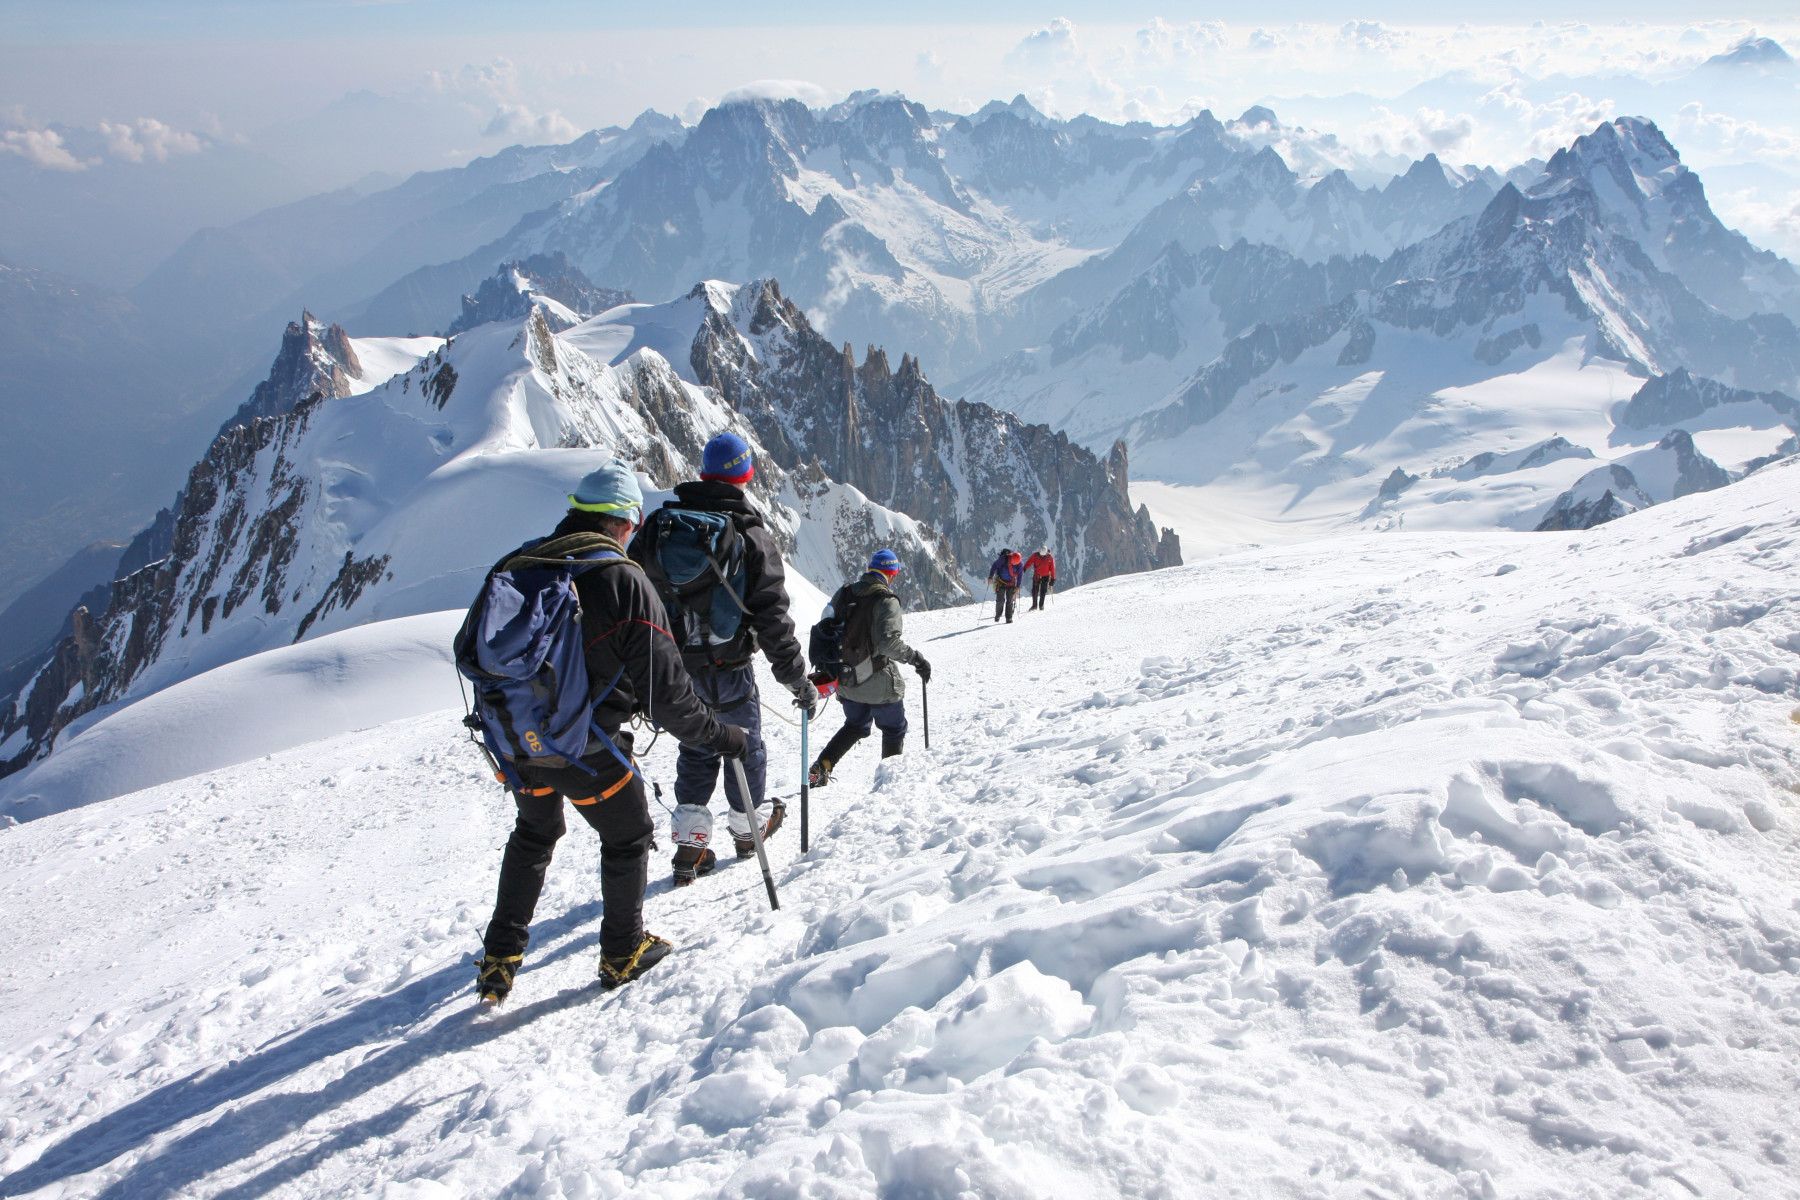 Trekkers in the snowy, high-altitude environment of Mont Blanc. Photo: Guillame Besnard.